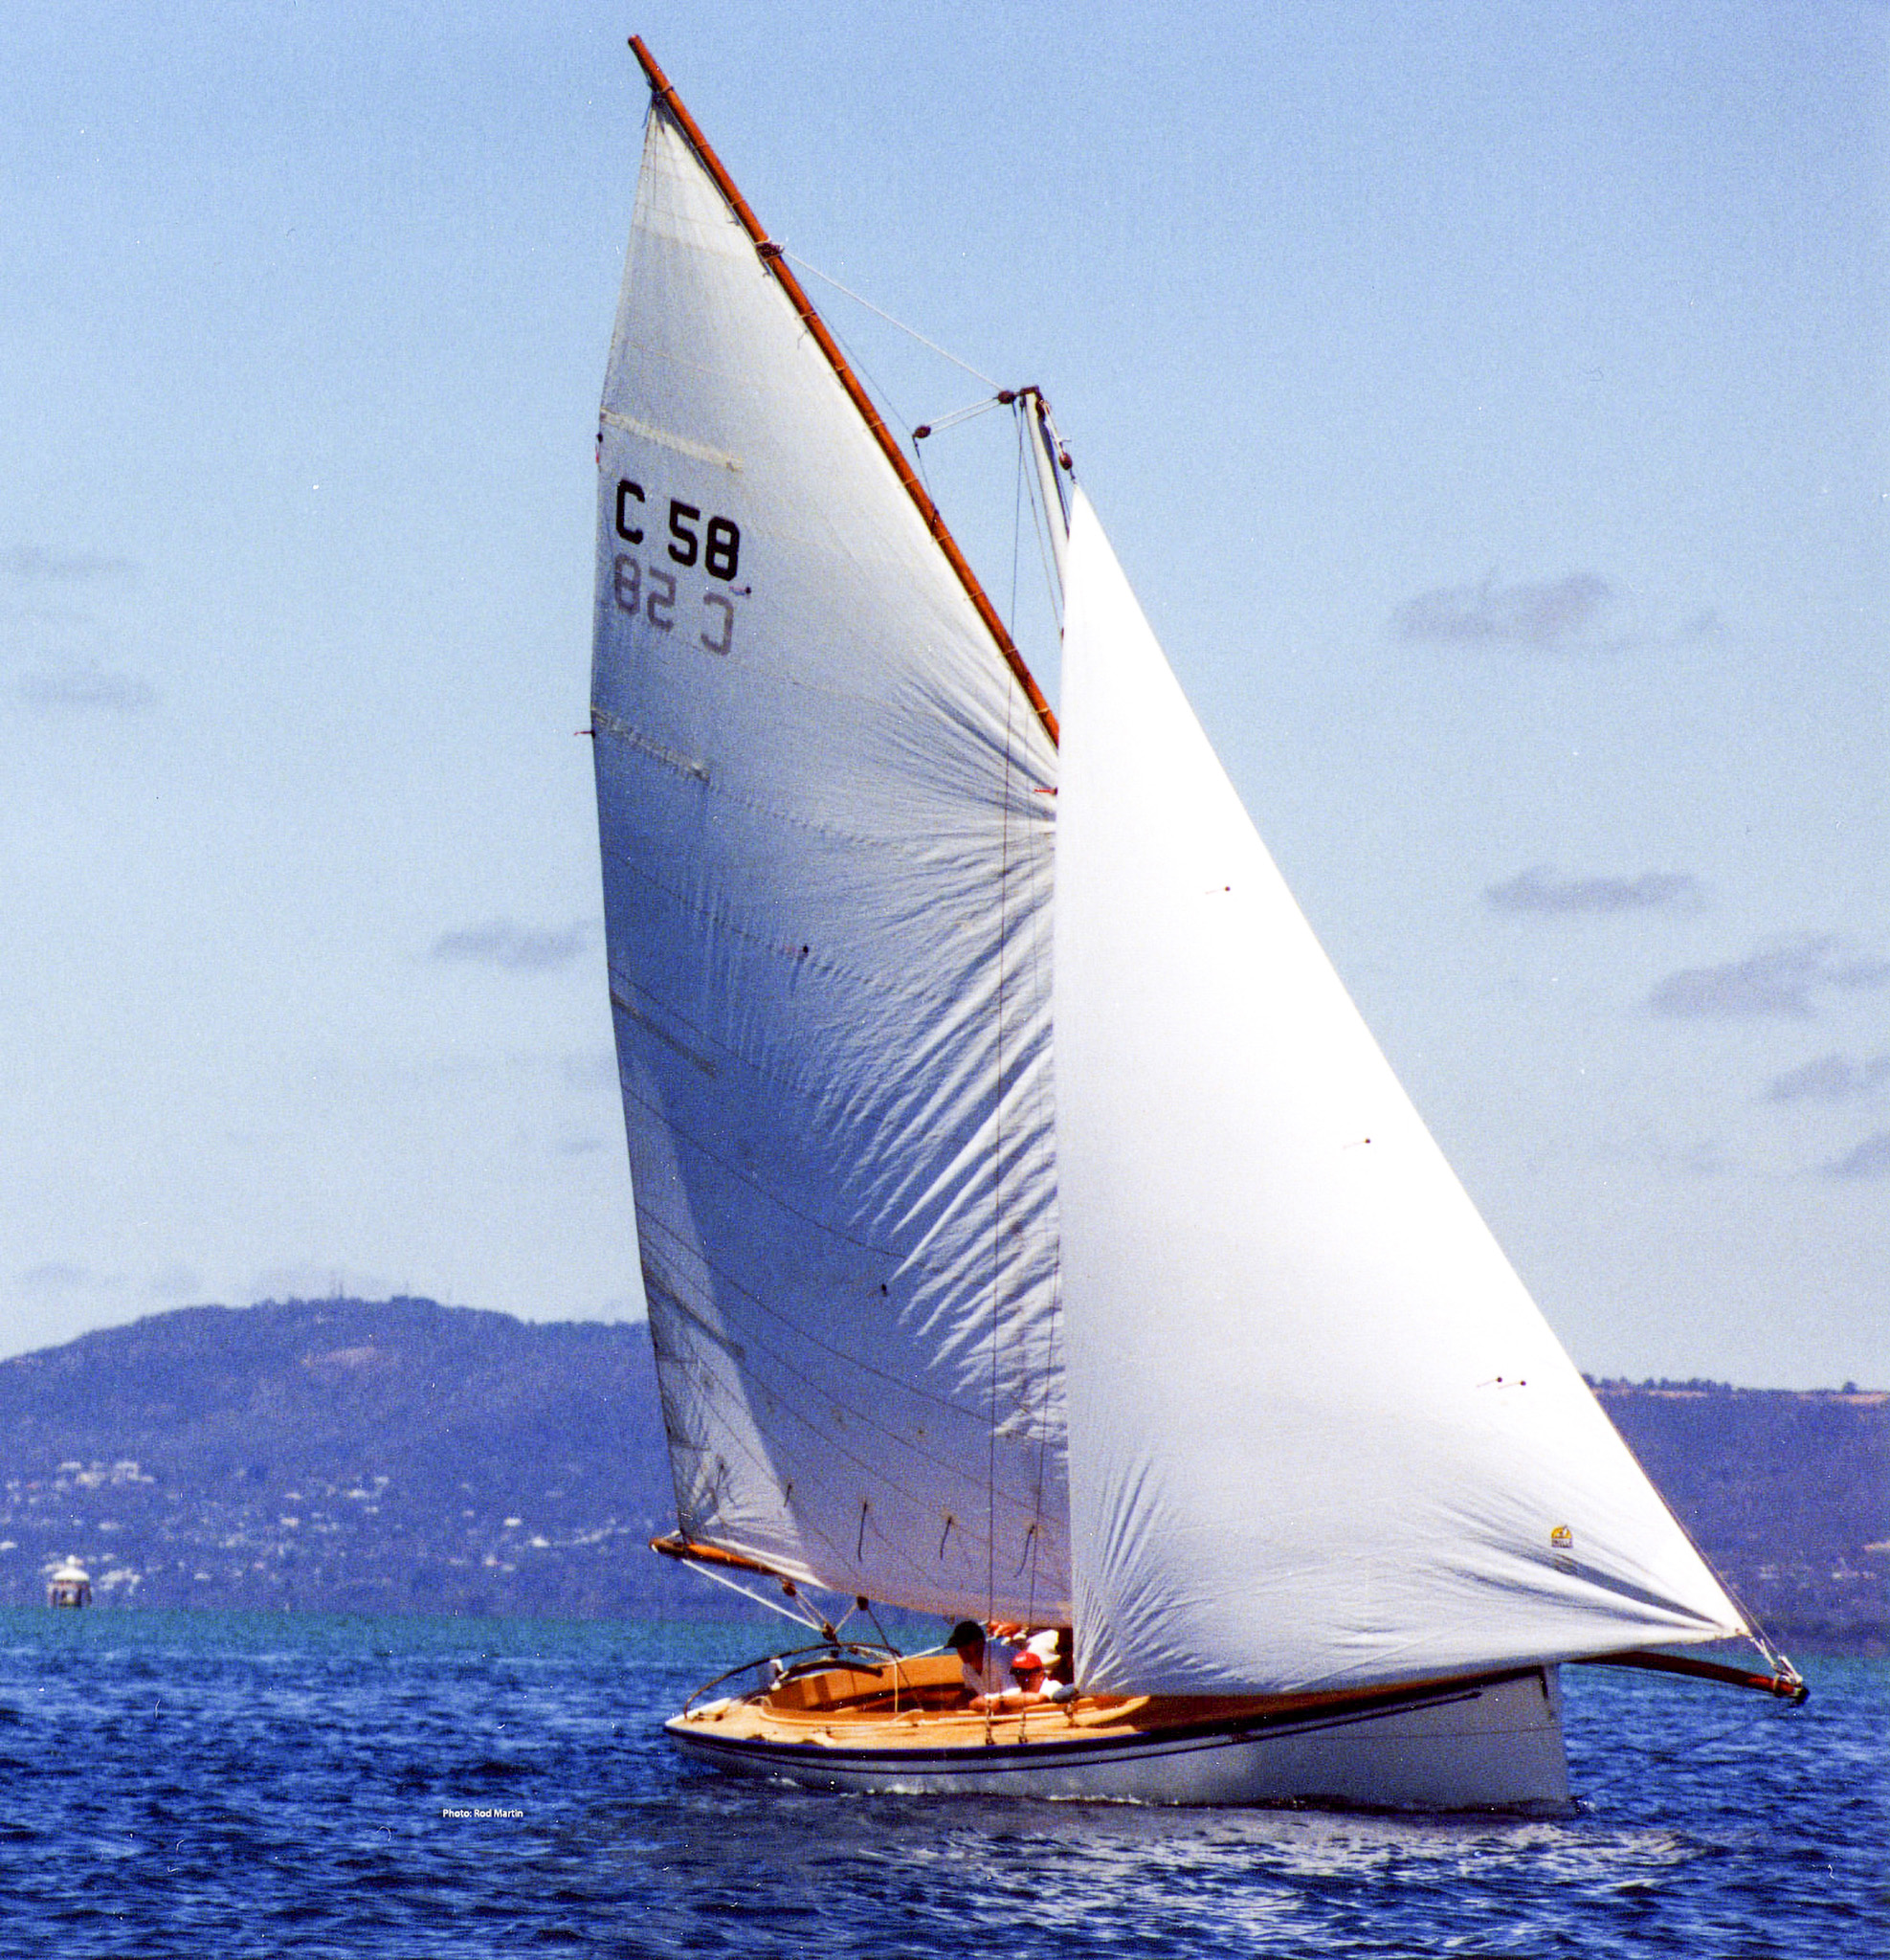 Armadale C58 - Home of the Couta Boats